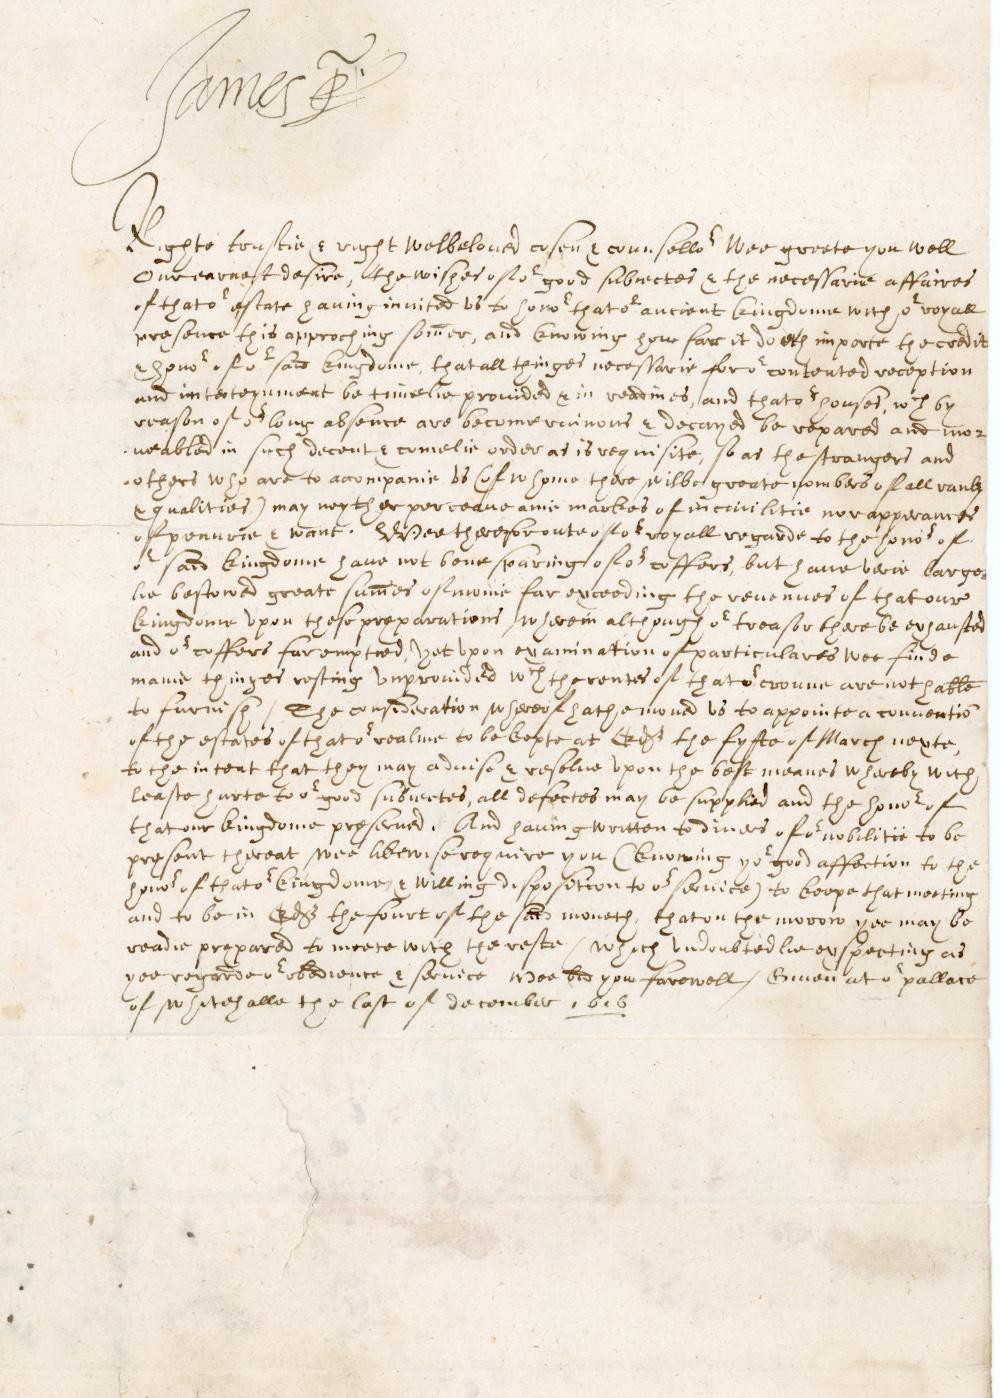 An official royal letter signed by King James I in 1616.
Regarding plans for his famous state visit to Scotland in 1617
James VI and I (1566 – 1625) was King of Scotland as James VI from 1567 and King of England and Ireland as James I from 1603